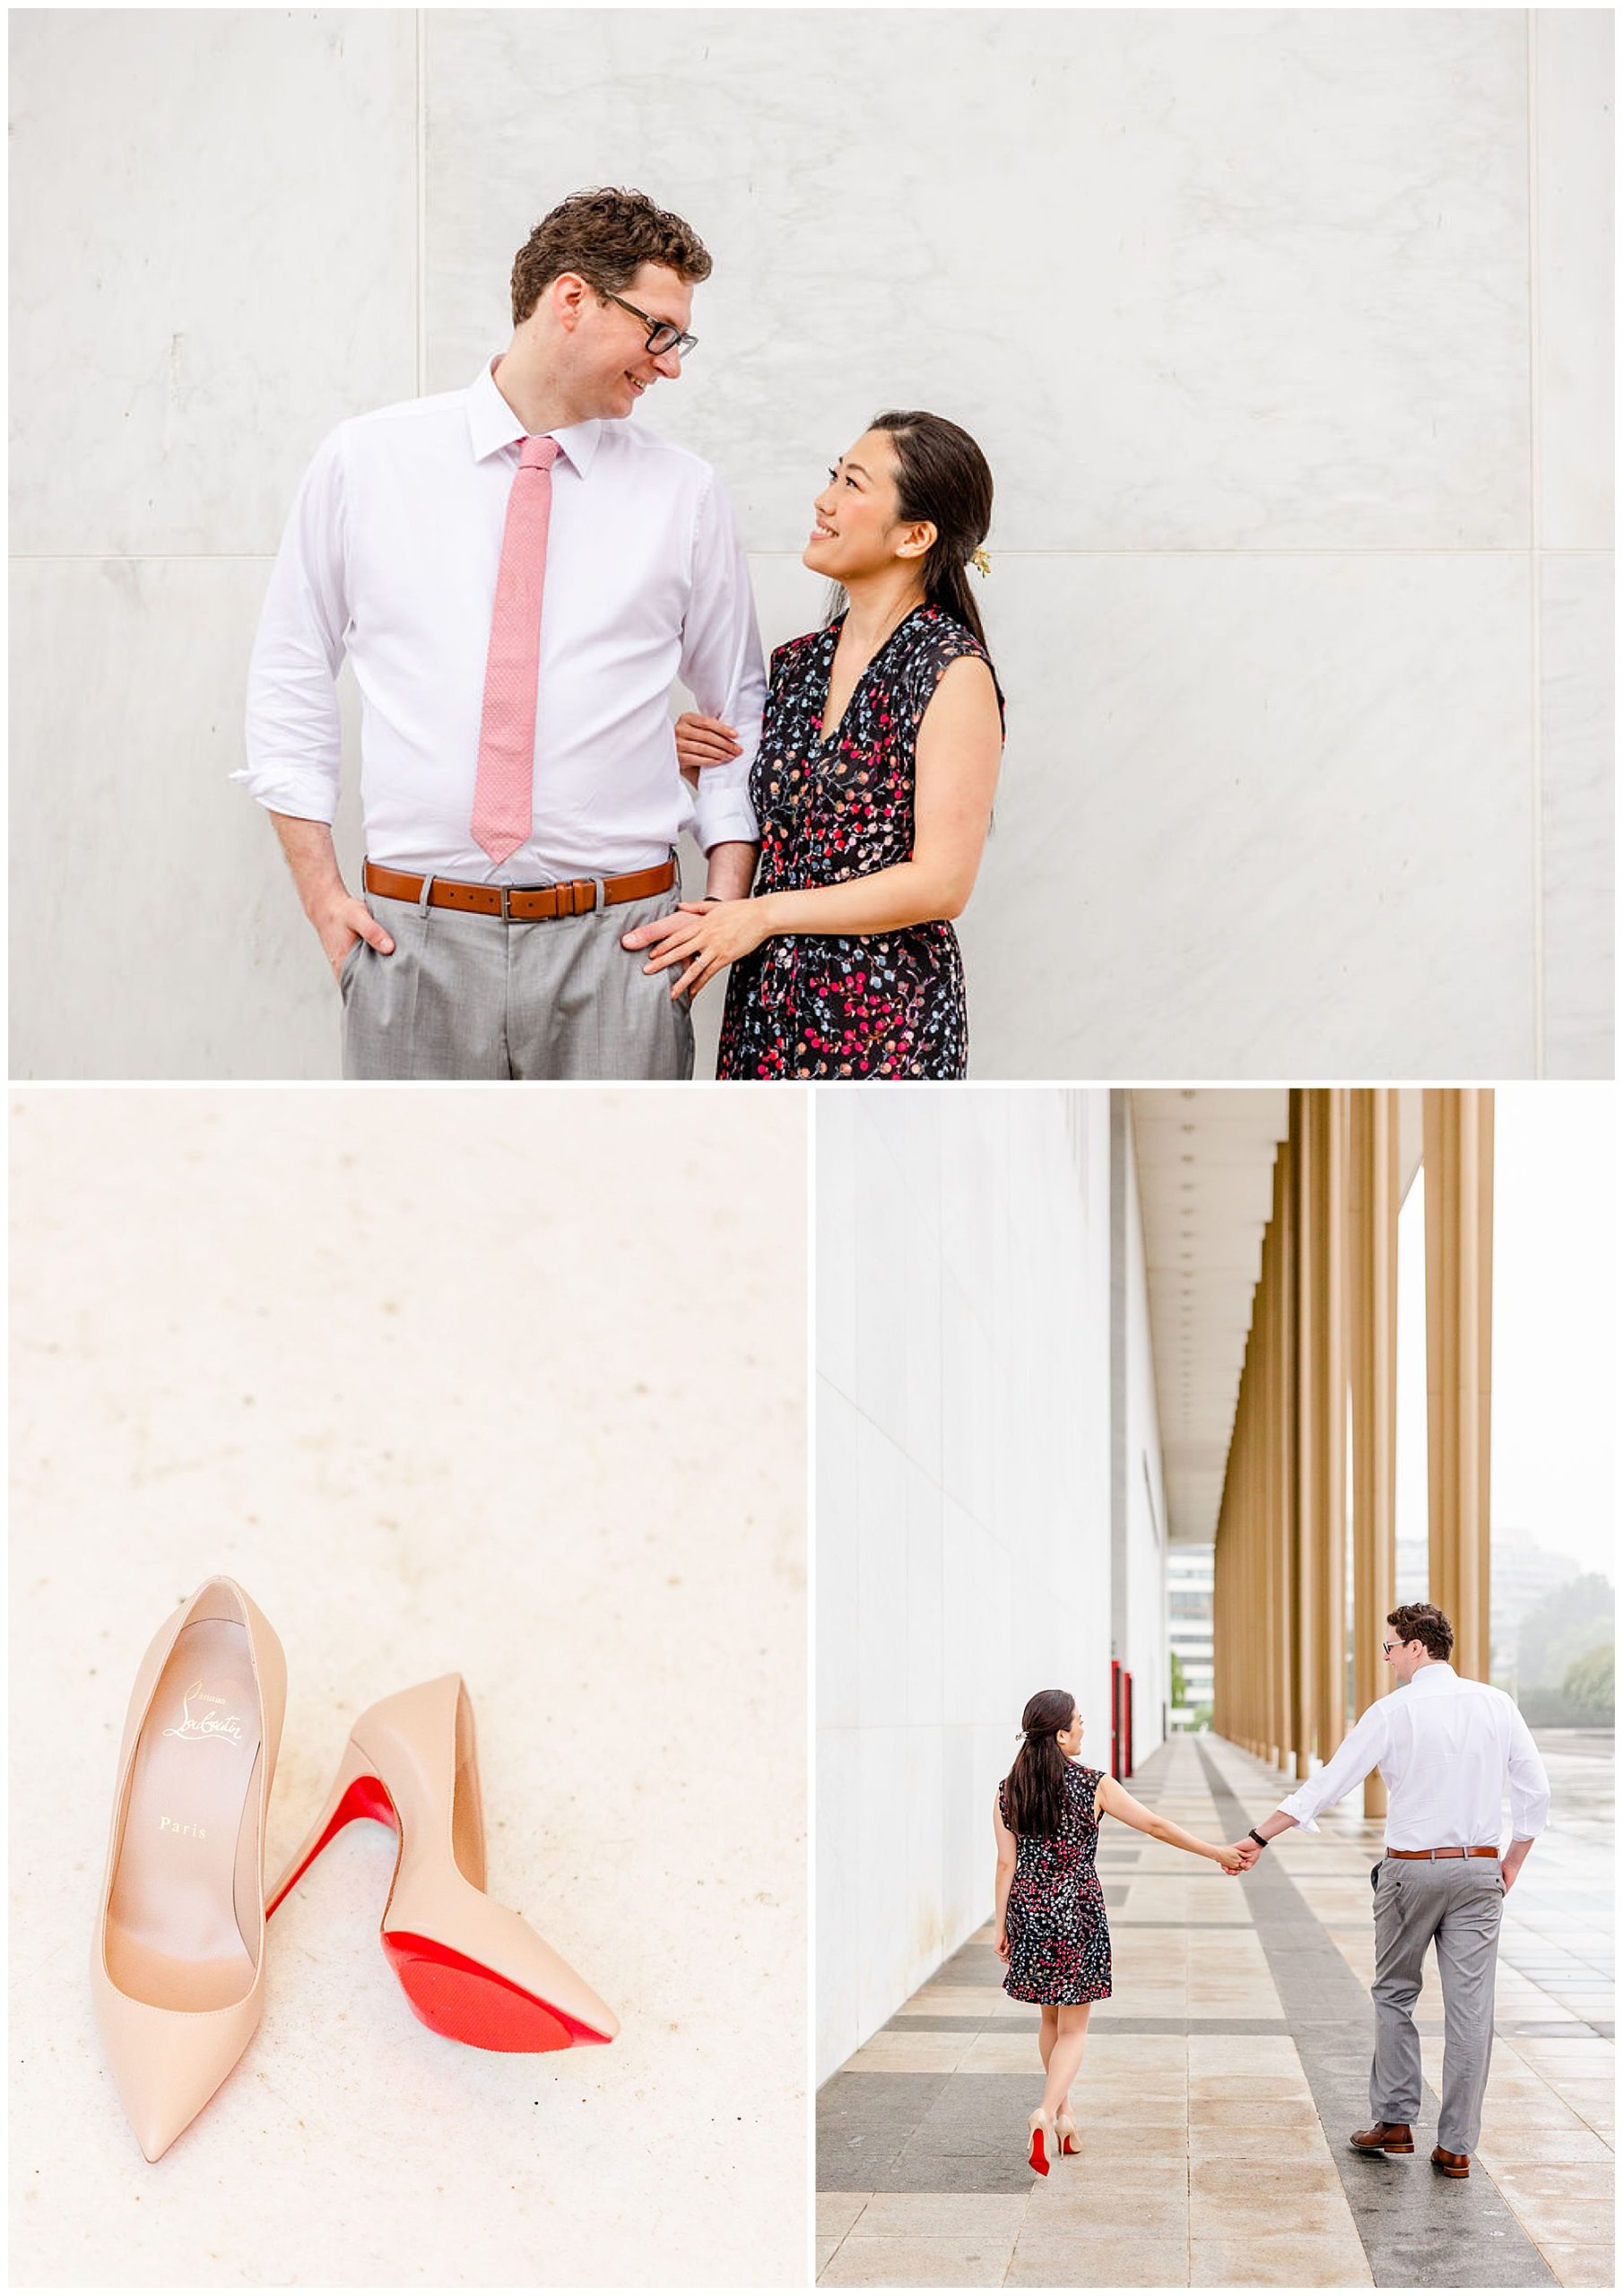 sunrise and sunset DC wedding, DC wedding photos, DC wedding portraits, micro-wedding, DC micro-wedding photography, DC micro-wedding photographer, DC petite wedding photographer, northern Virginia wedding photography, natural light wedding photography, unique wedding, Rachel E.H. Photography, couple looking at each other, beige wedding shoes, couple holding hands from a distance, hair and makeup by Carolyn Thombs Artistry